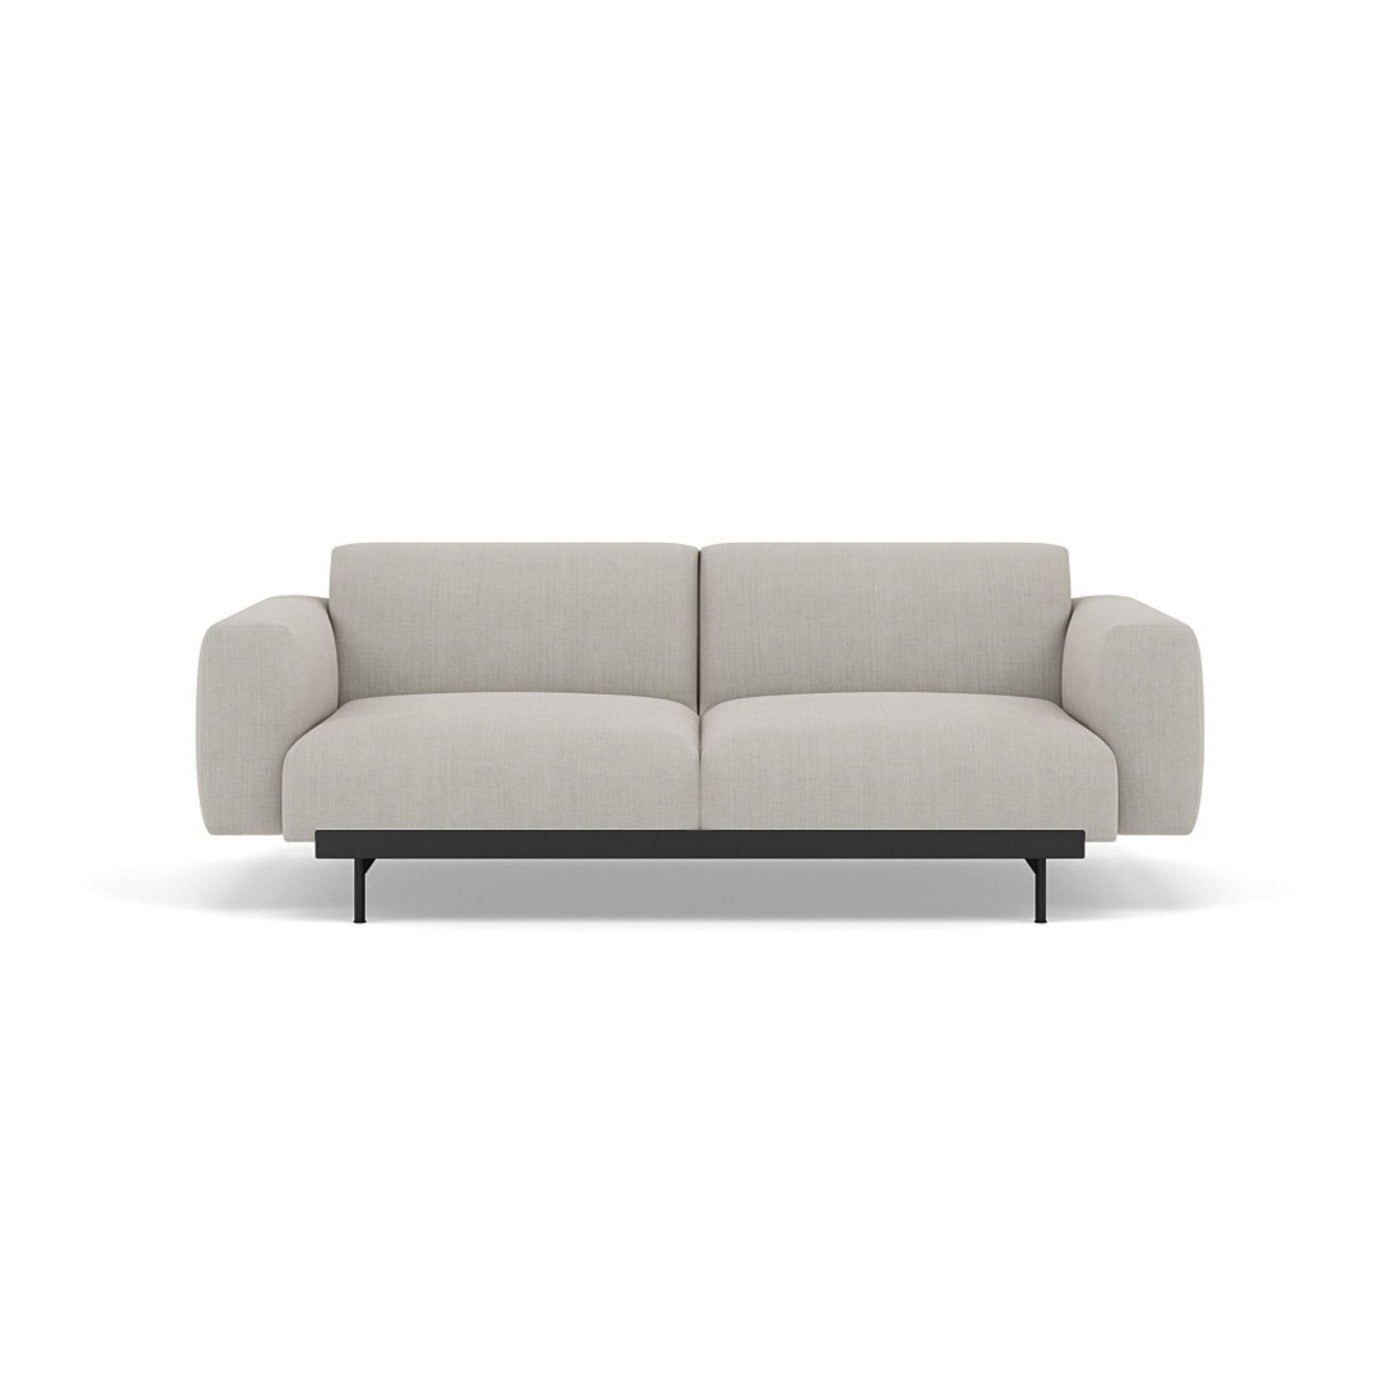 Muuto In Situ Modular 2 Seater Sofa, configuration 1. Made to order from someday designs #colour_fiord-201